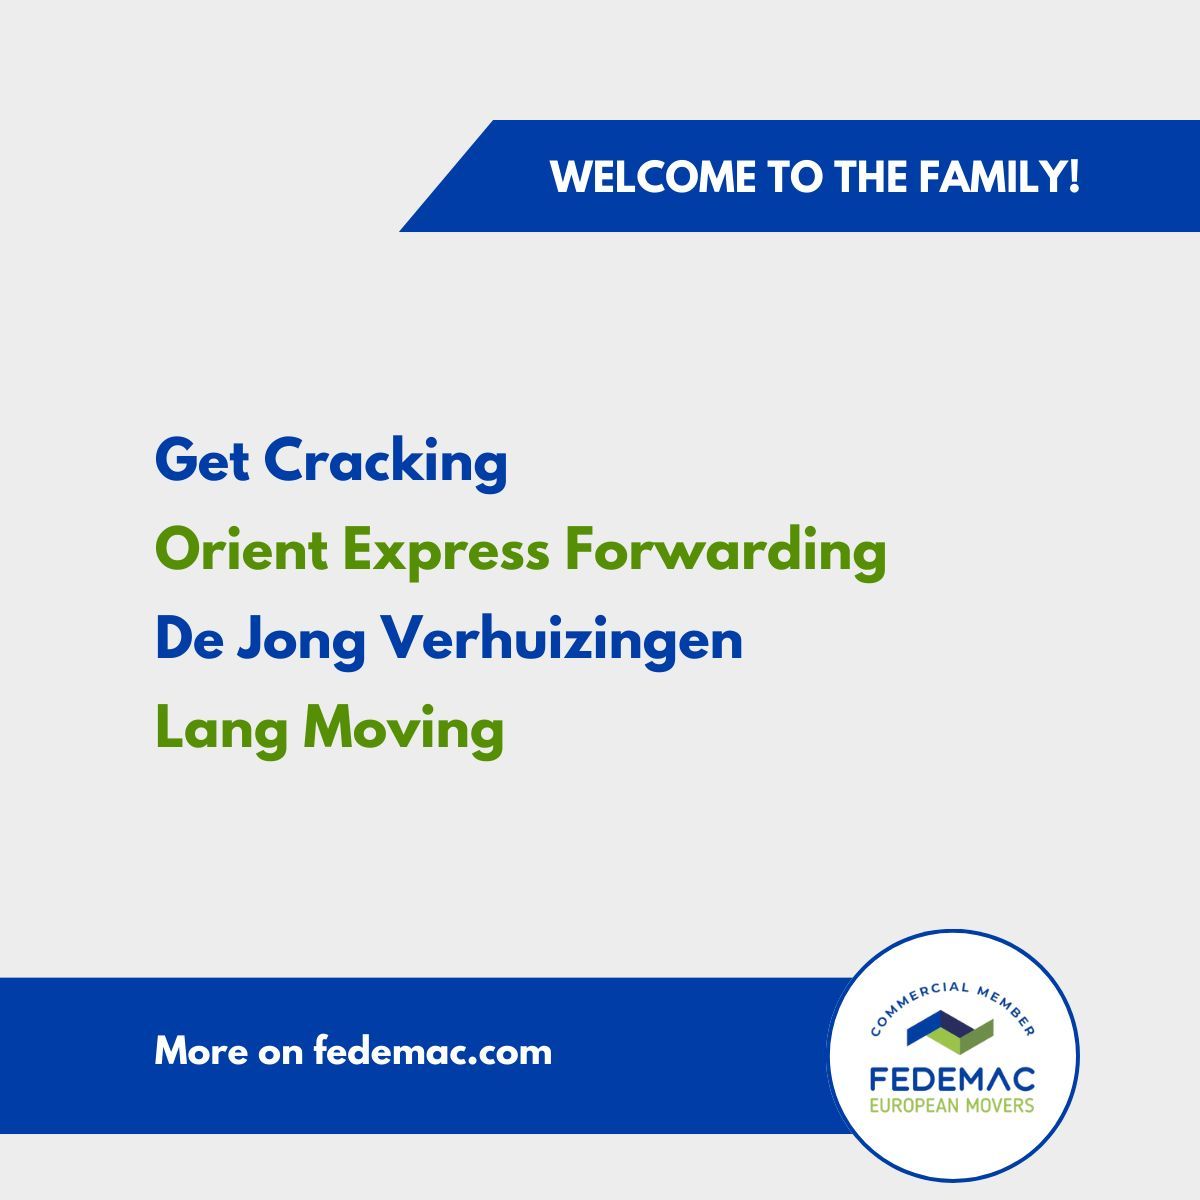 🎉 Welcome to our newest FEDEMAC family members! 🌍 Excited to have Get Cracking, Orient Express Forwarding, De Jong Verhuizingen, and Lang Moving on board. Join us at buff.ly/47NEDIa to expand and connect in Europe. #FEDEMAC #MovingForwardTogether 🚚💼